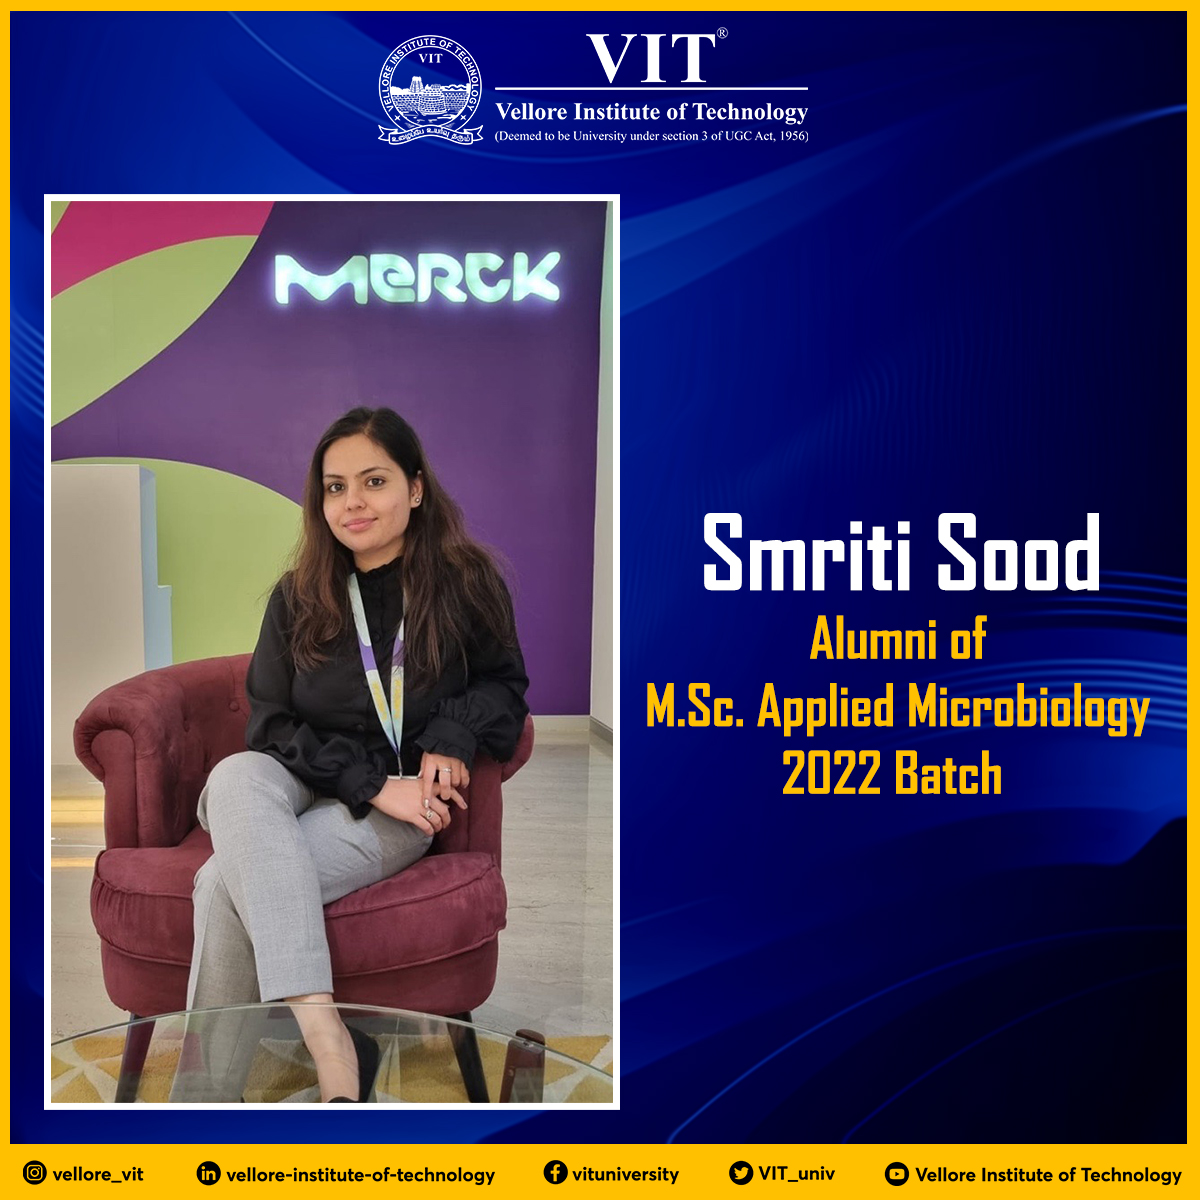 “I am thankful to #VIT for the opportunities it offered me and would recommend the prestigious university to anyone who is seeking quality education'
Ms. Smriti Sood
#MScAppliedMicrobiology
#Batch2022

#Alumni #PrideofVIT #AlumniConnect #Classof2022 #Testimonials #Merck